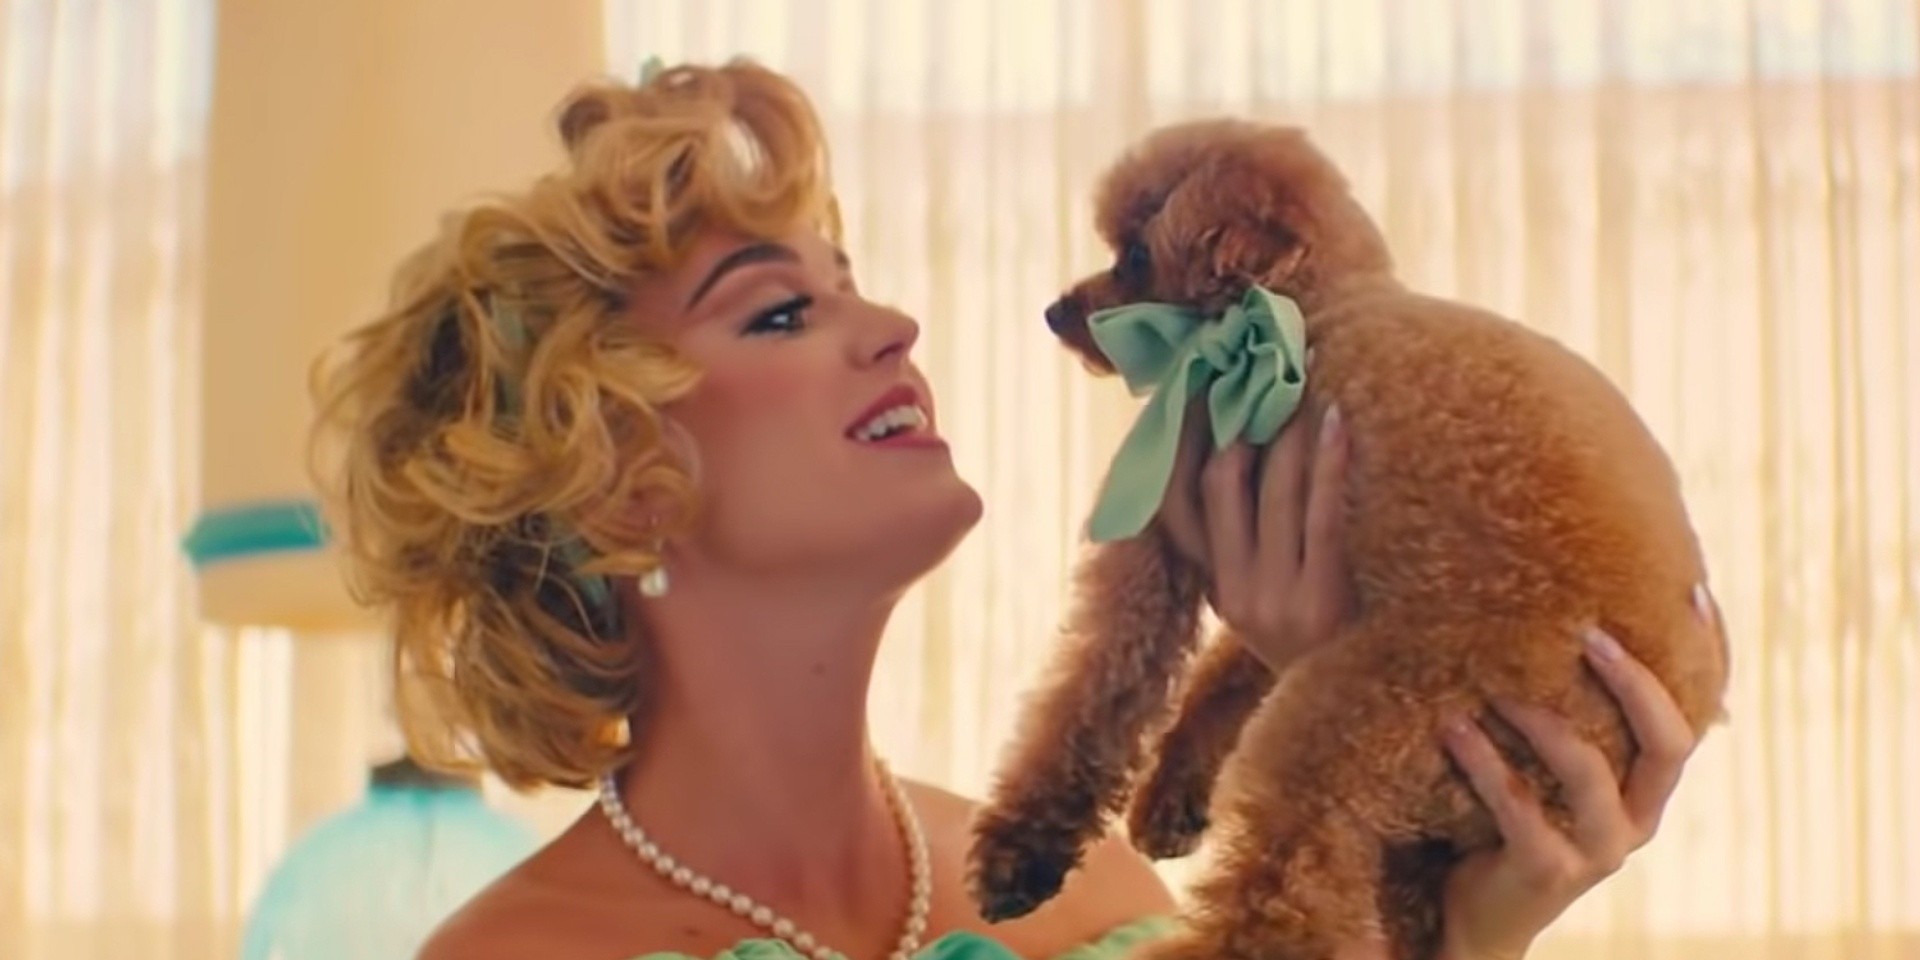 Katy Perry releases adorable new video for 'Small Talk' – watch